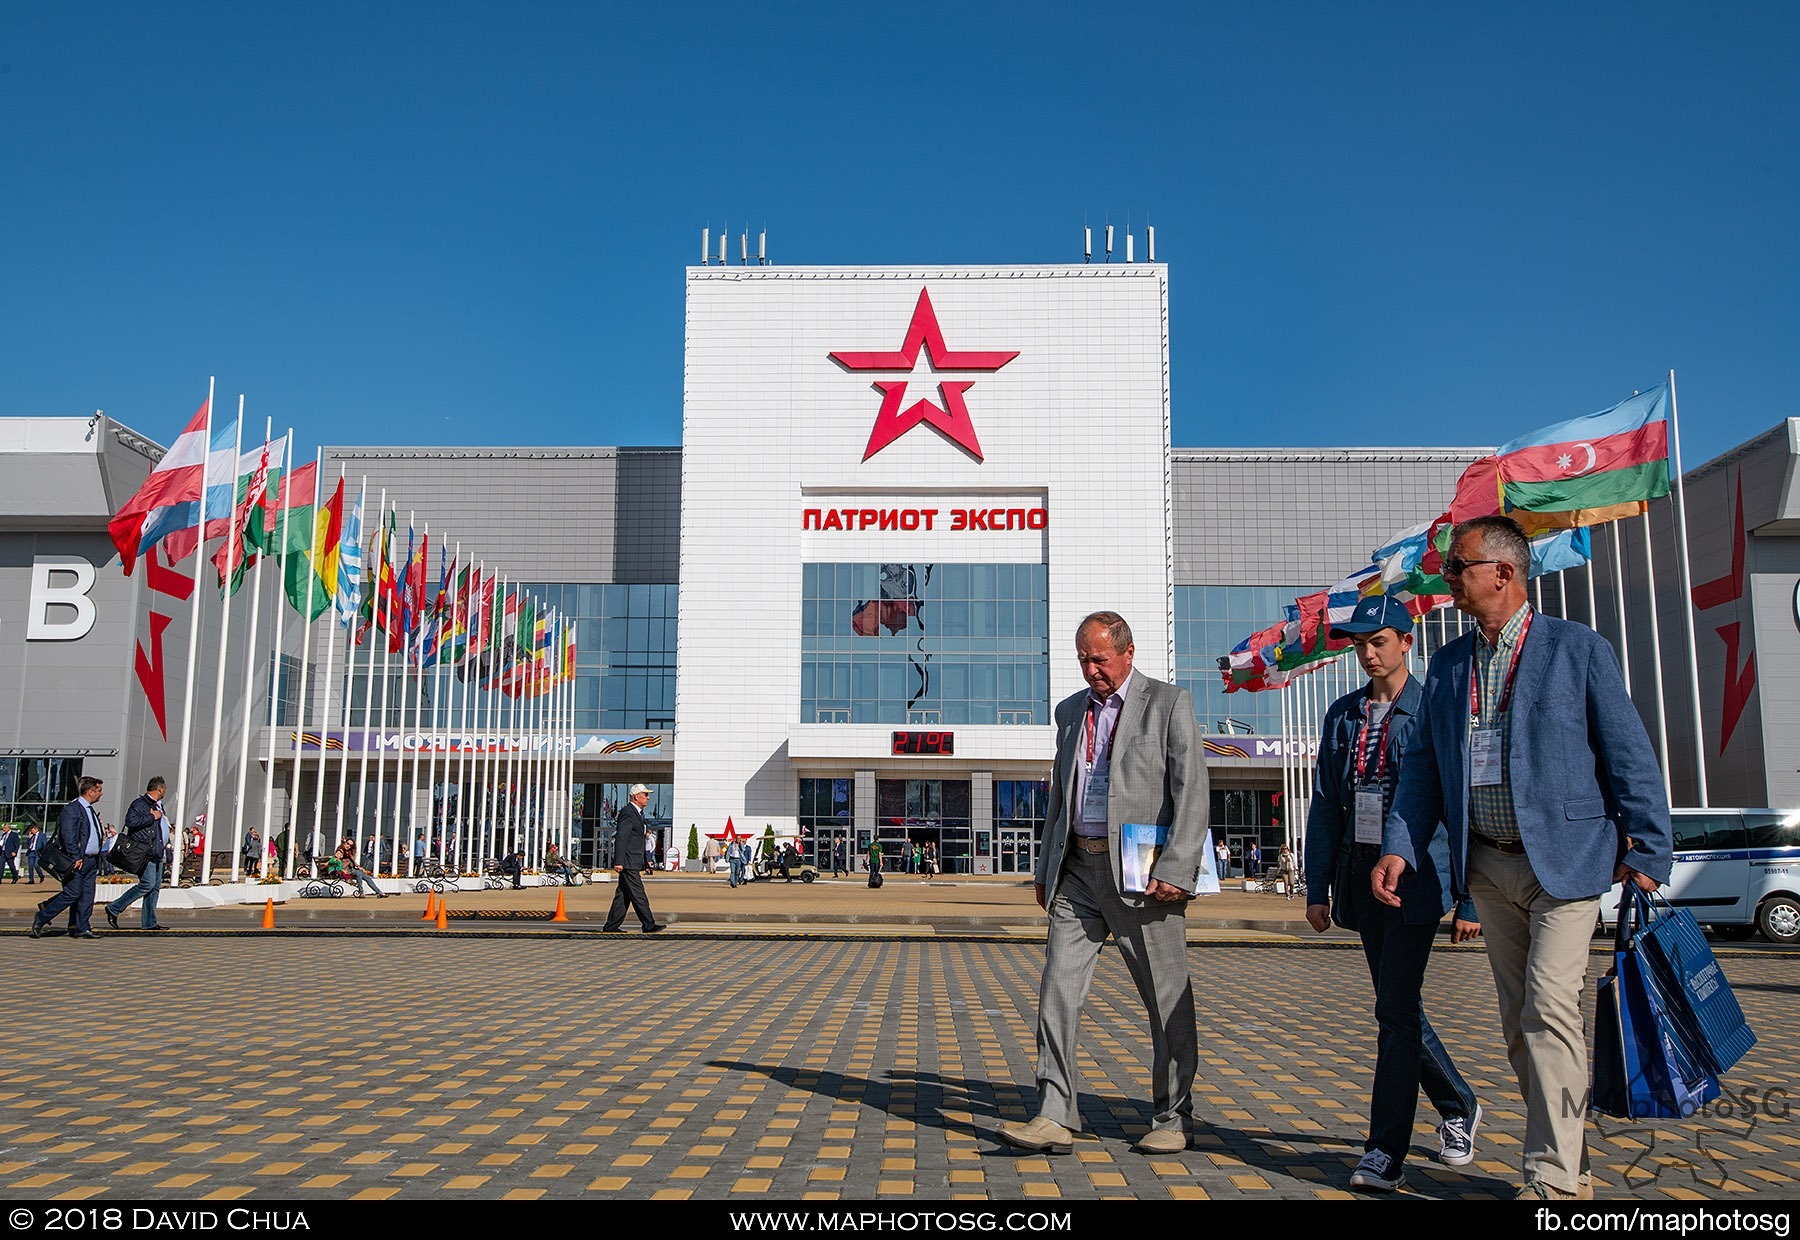 02. Main entrance to the exhibition halls of ARMY2018